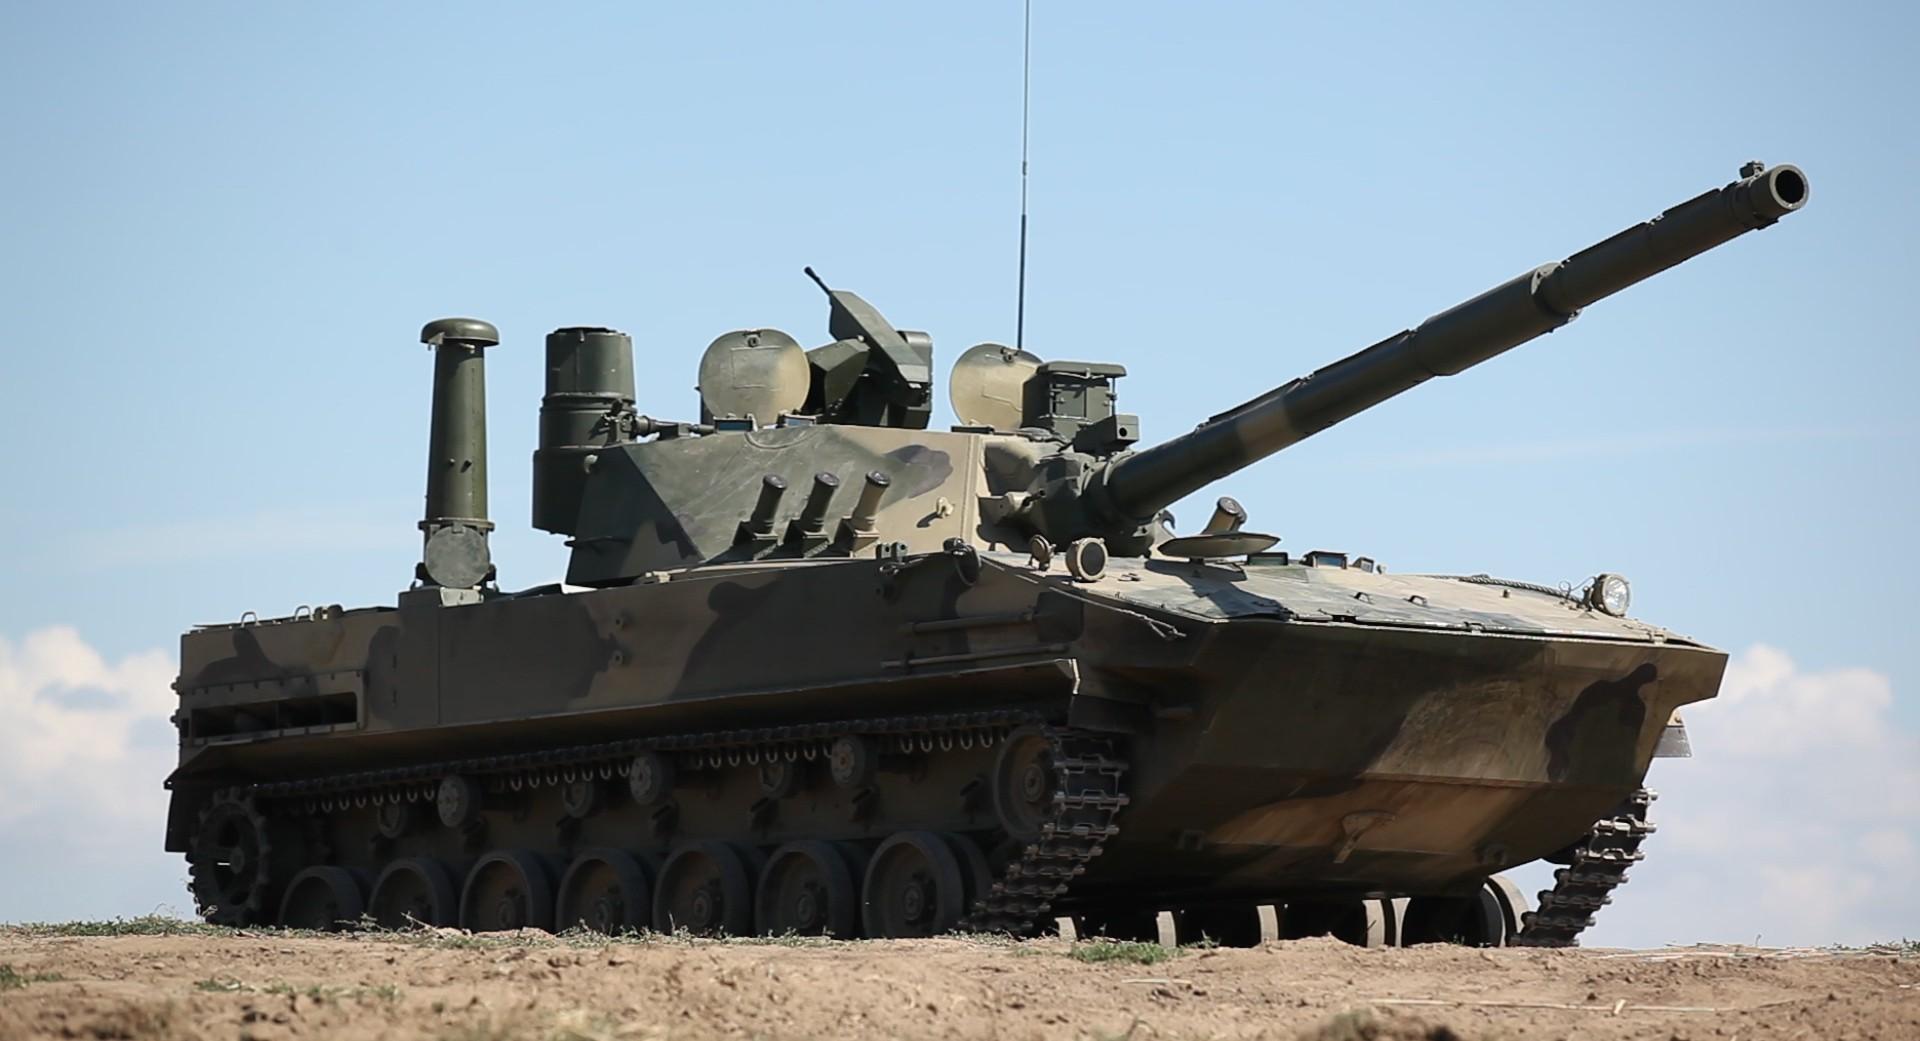 Rostech has announced that testing is progressing on the new Sprut-SDM1 upgraded light tank, also classified as a Self-Propelled Gun